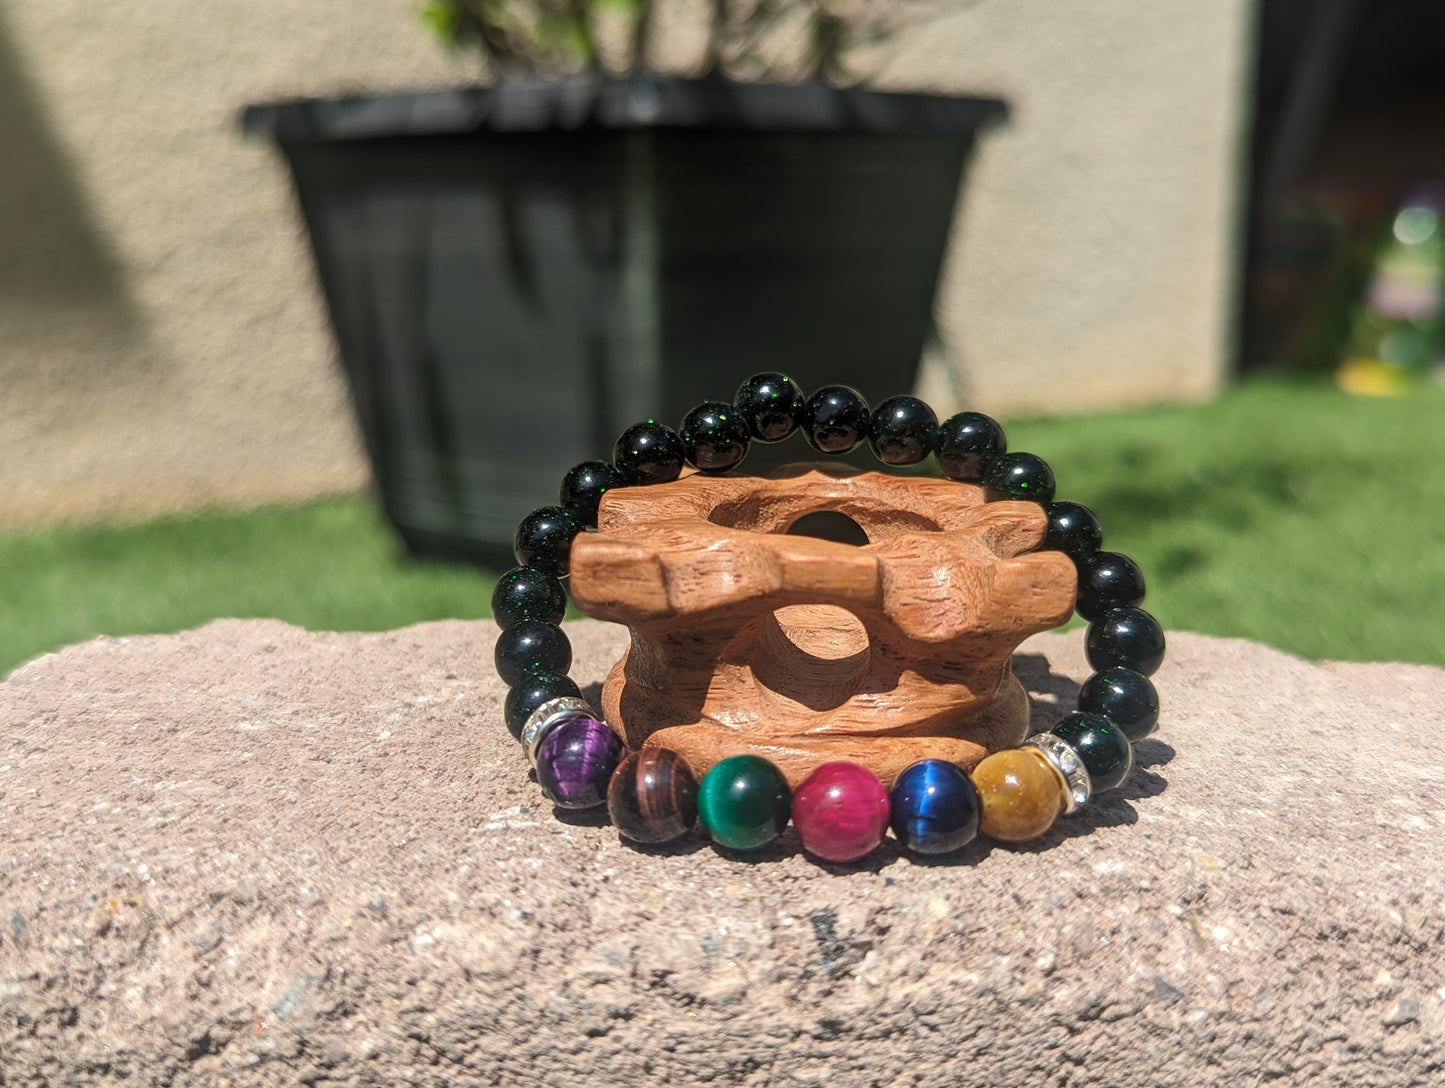 Rainbow Shadows Bracelet (Multi-colored Tiger's Eye and Green Sandstone)